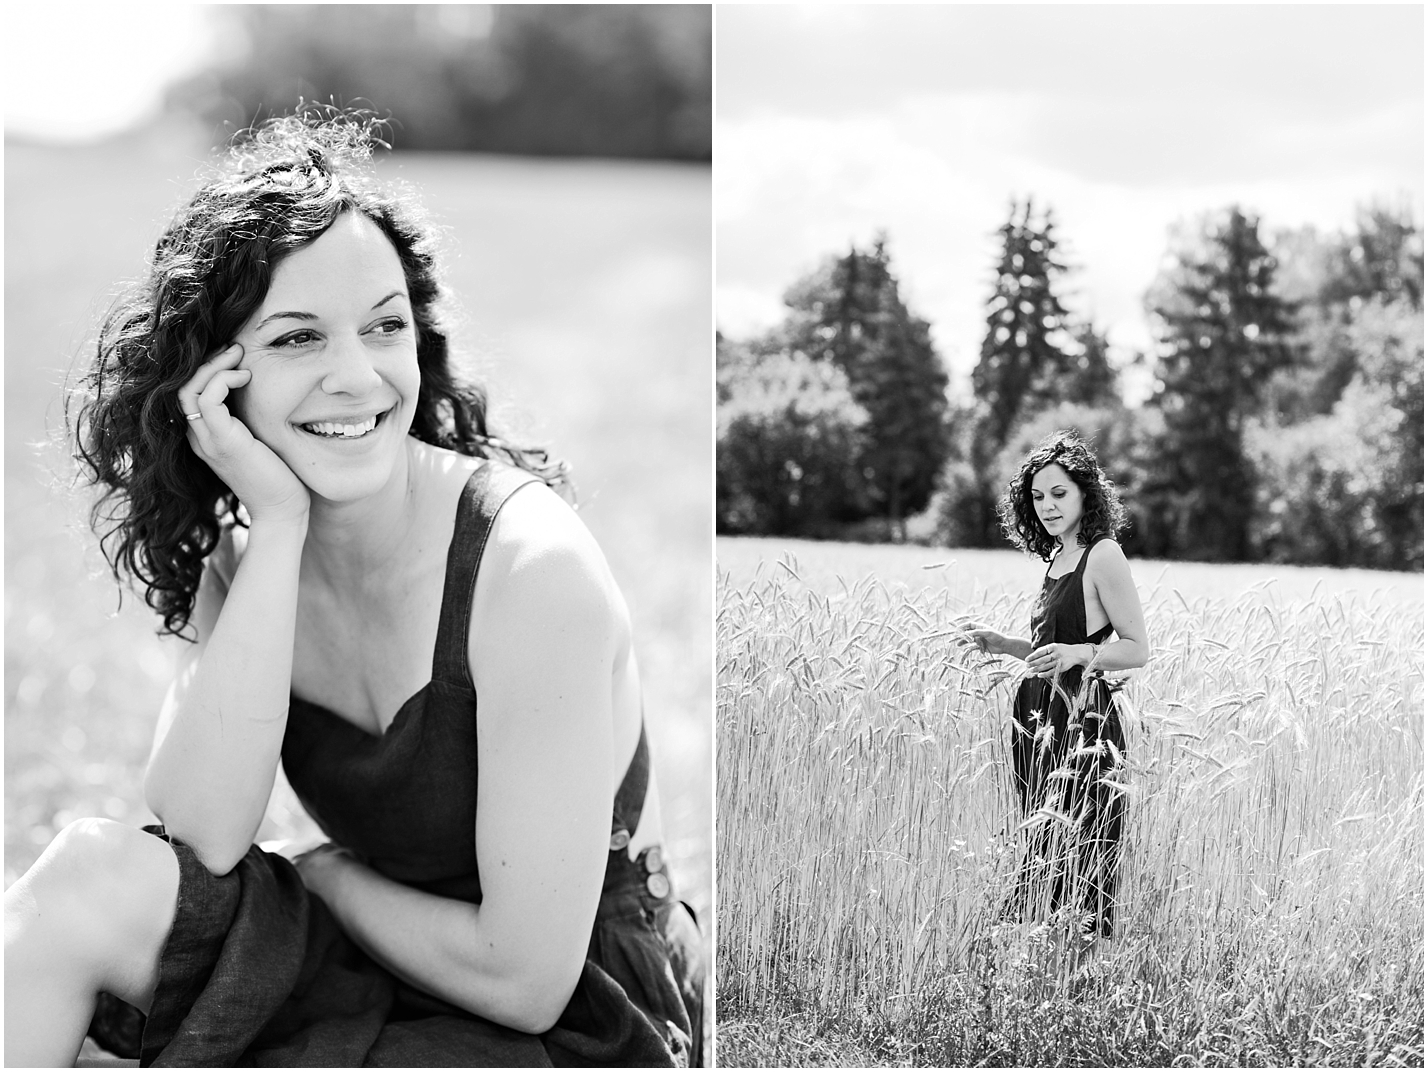 Beautiful-outdoor-family-portraits-in-a-field-schneider-family